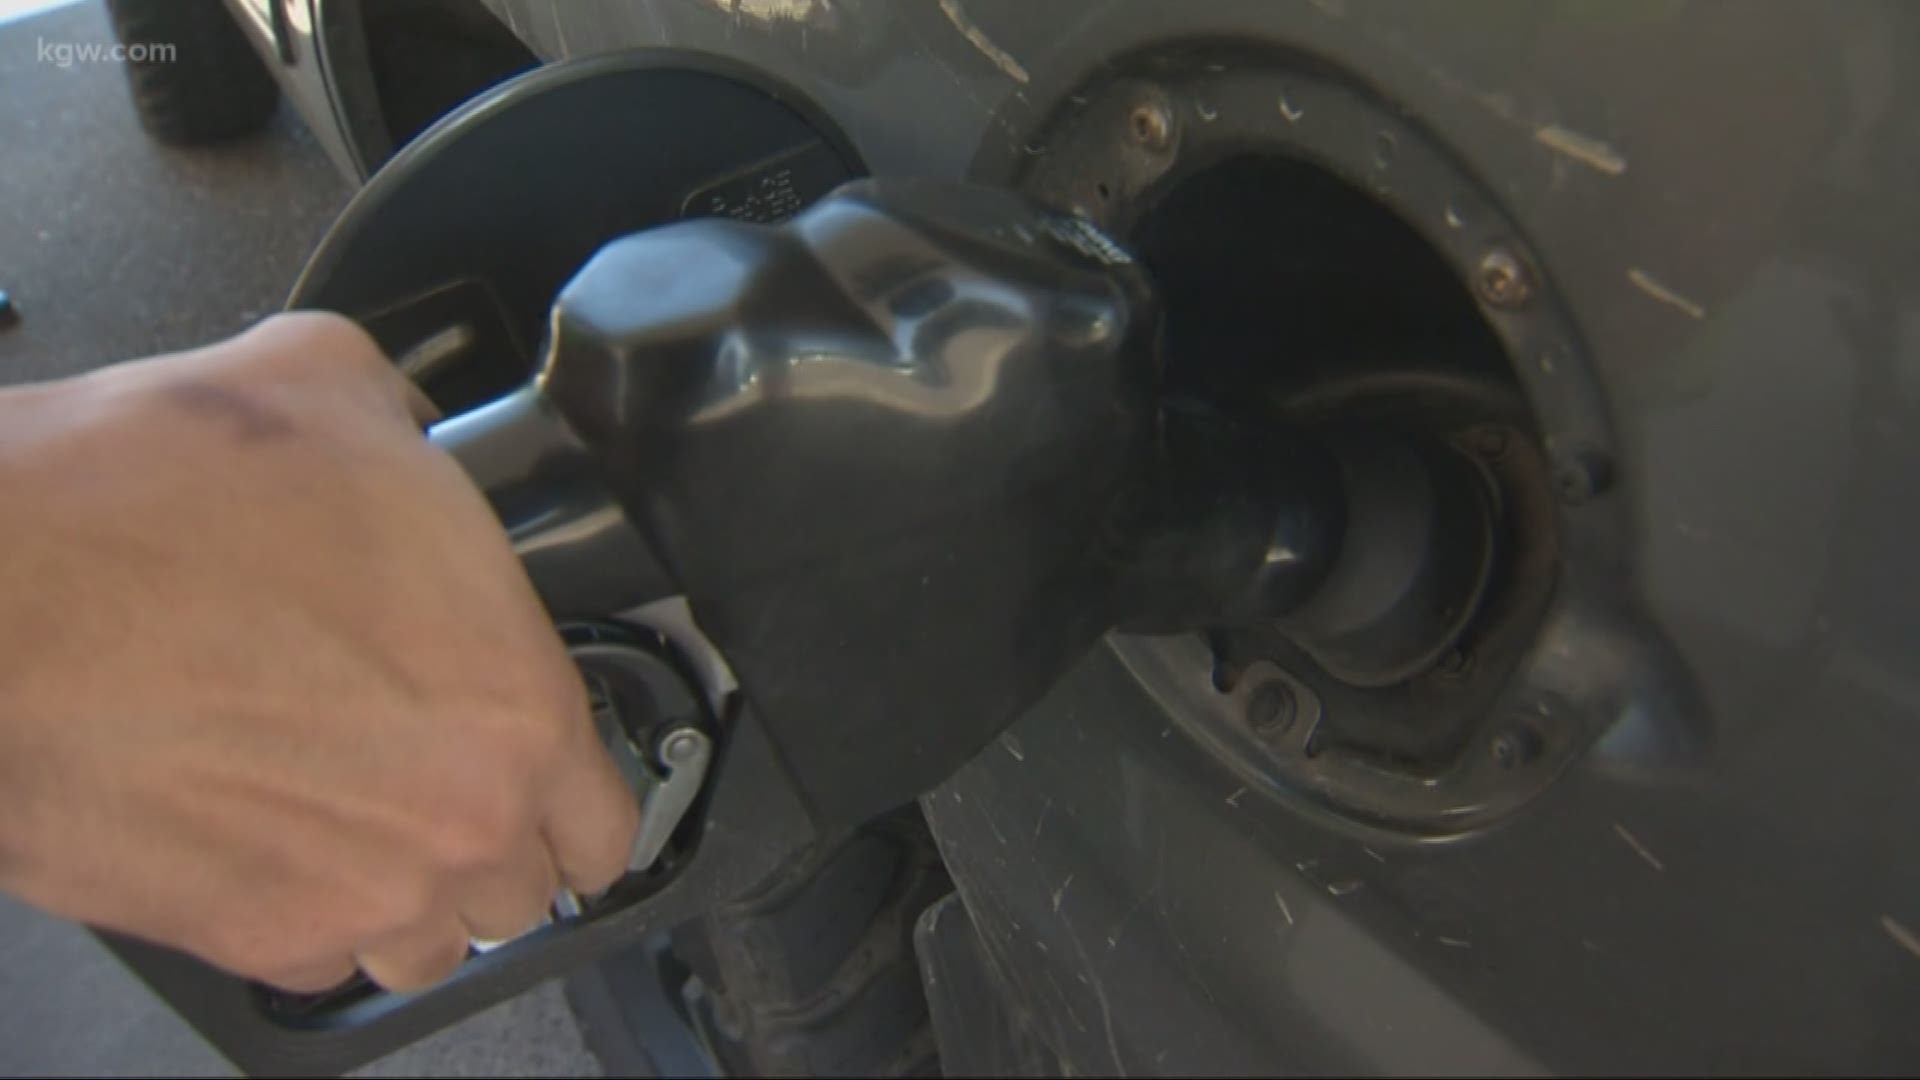 Are there legal ramifications for pumping your own gas in Oregon? We verify.